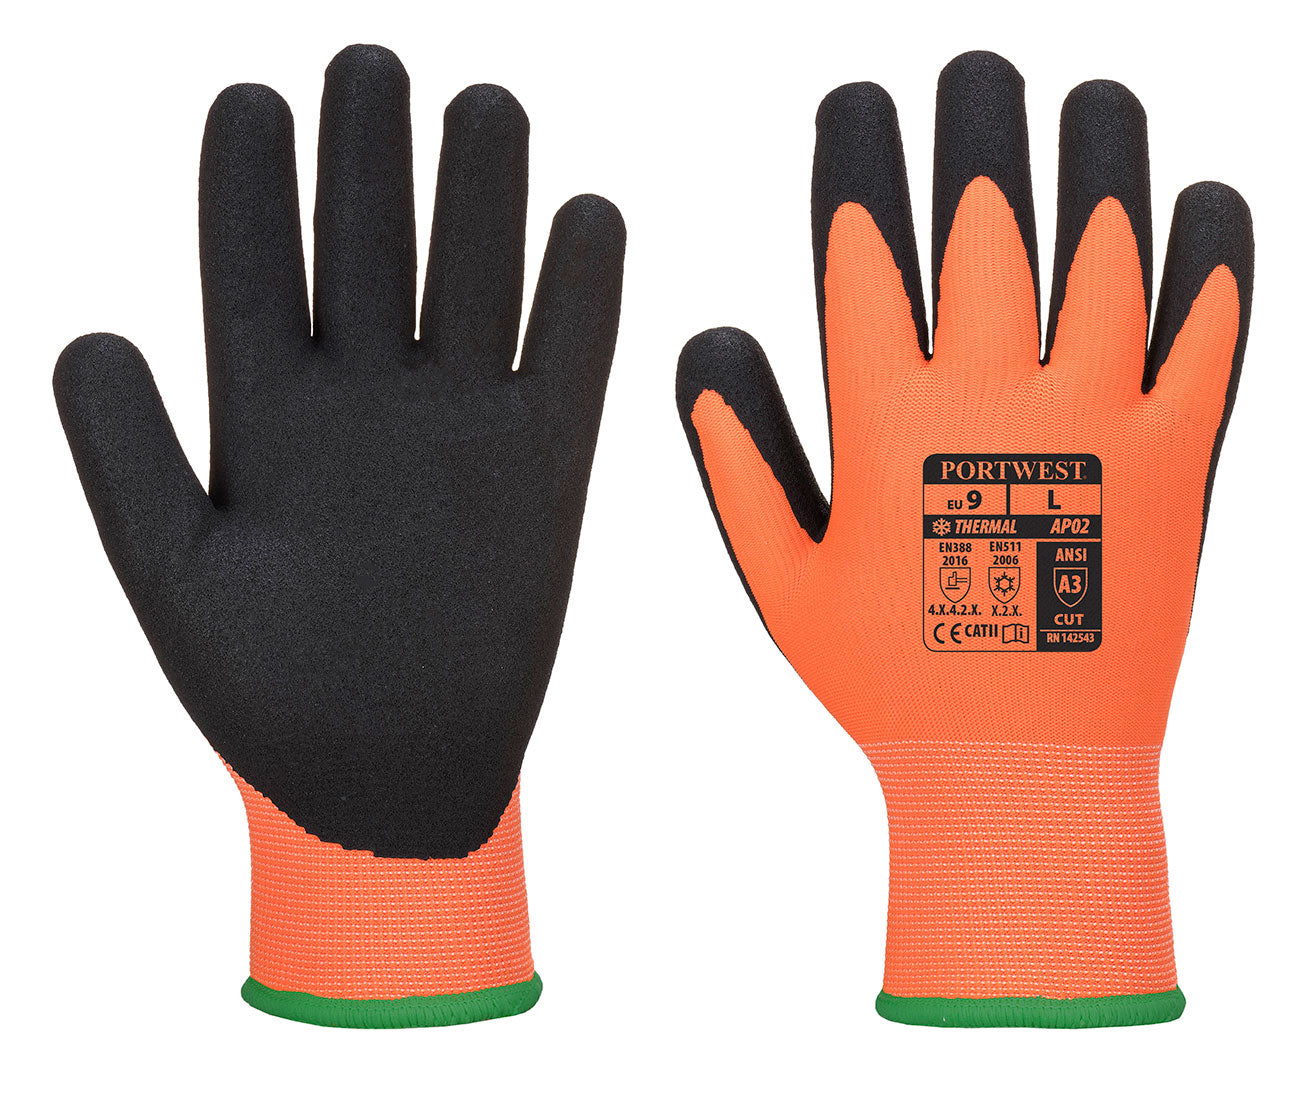 Portwest Thermo Pro Ultra Glove AP02 - New England Safety Supply